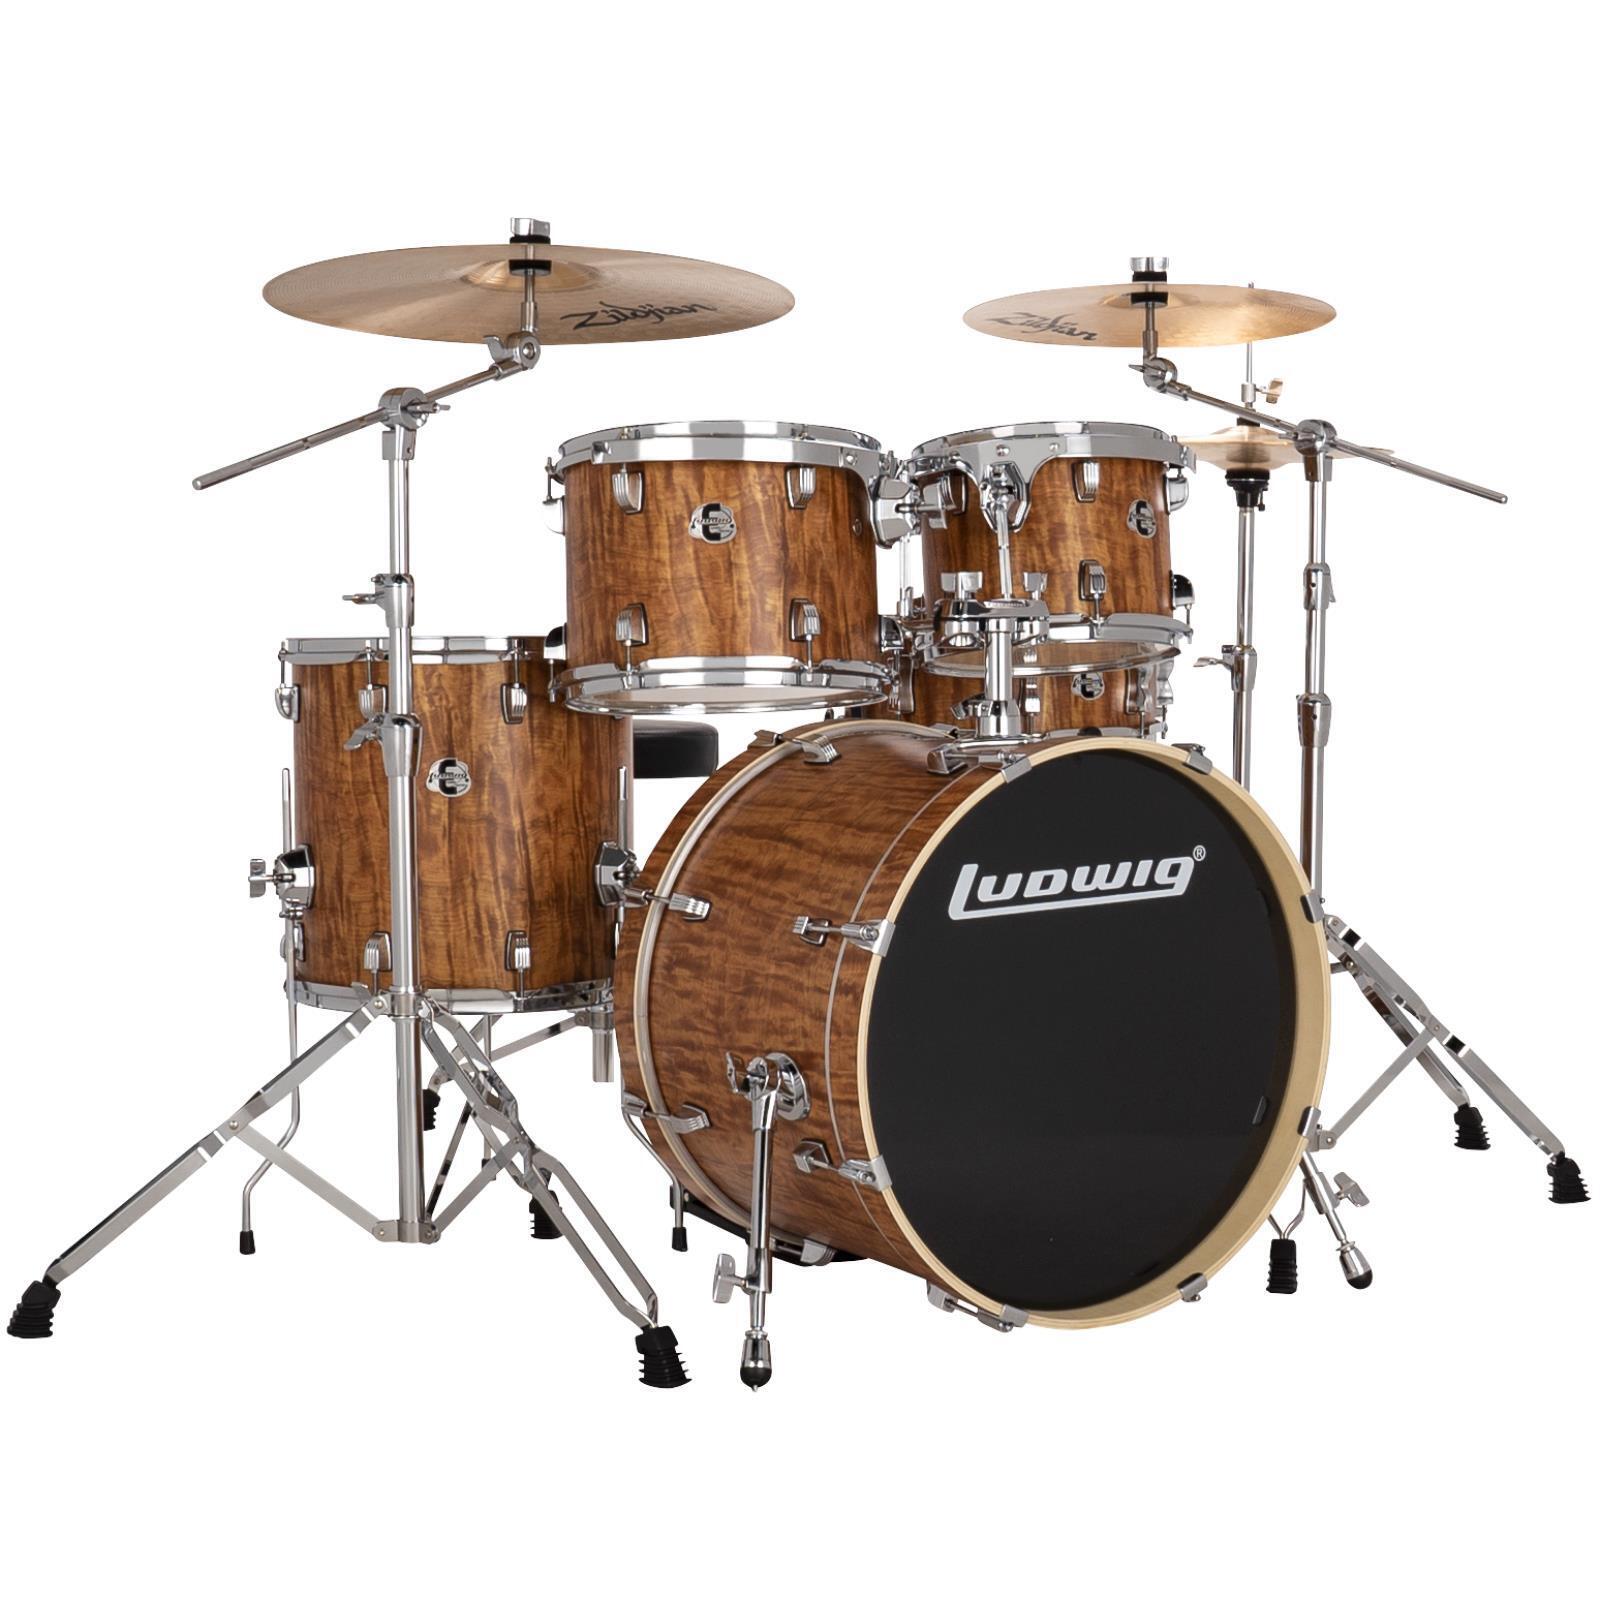 Ludwig LE520010 Element Evolution 5-Piece Drum Set with Zildjian Cymbals, Cherry 1